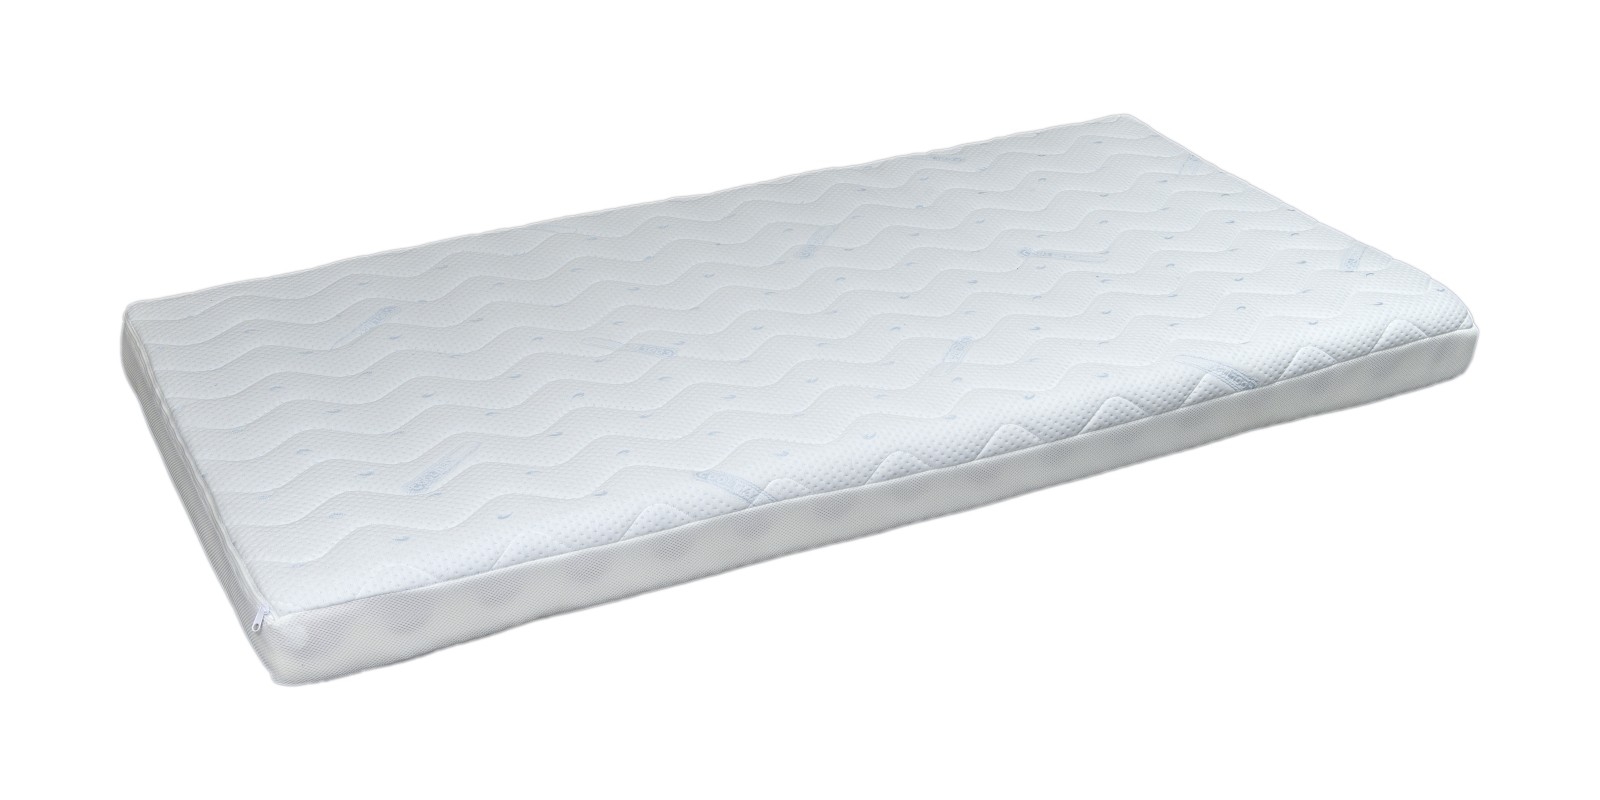 foam or spring mattress for child